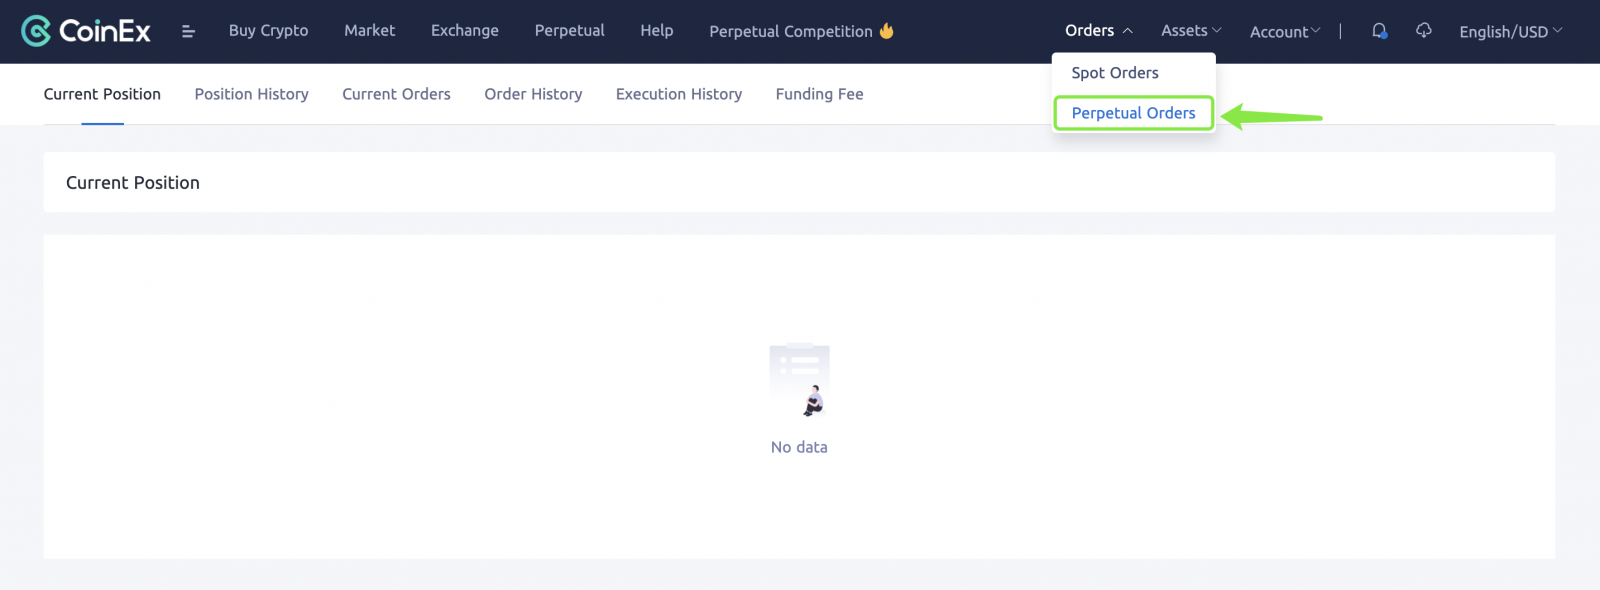 How to Check Order History and Asset History in CoinEx